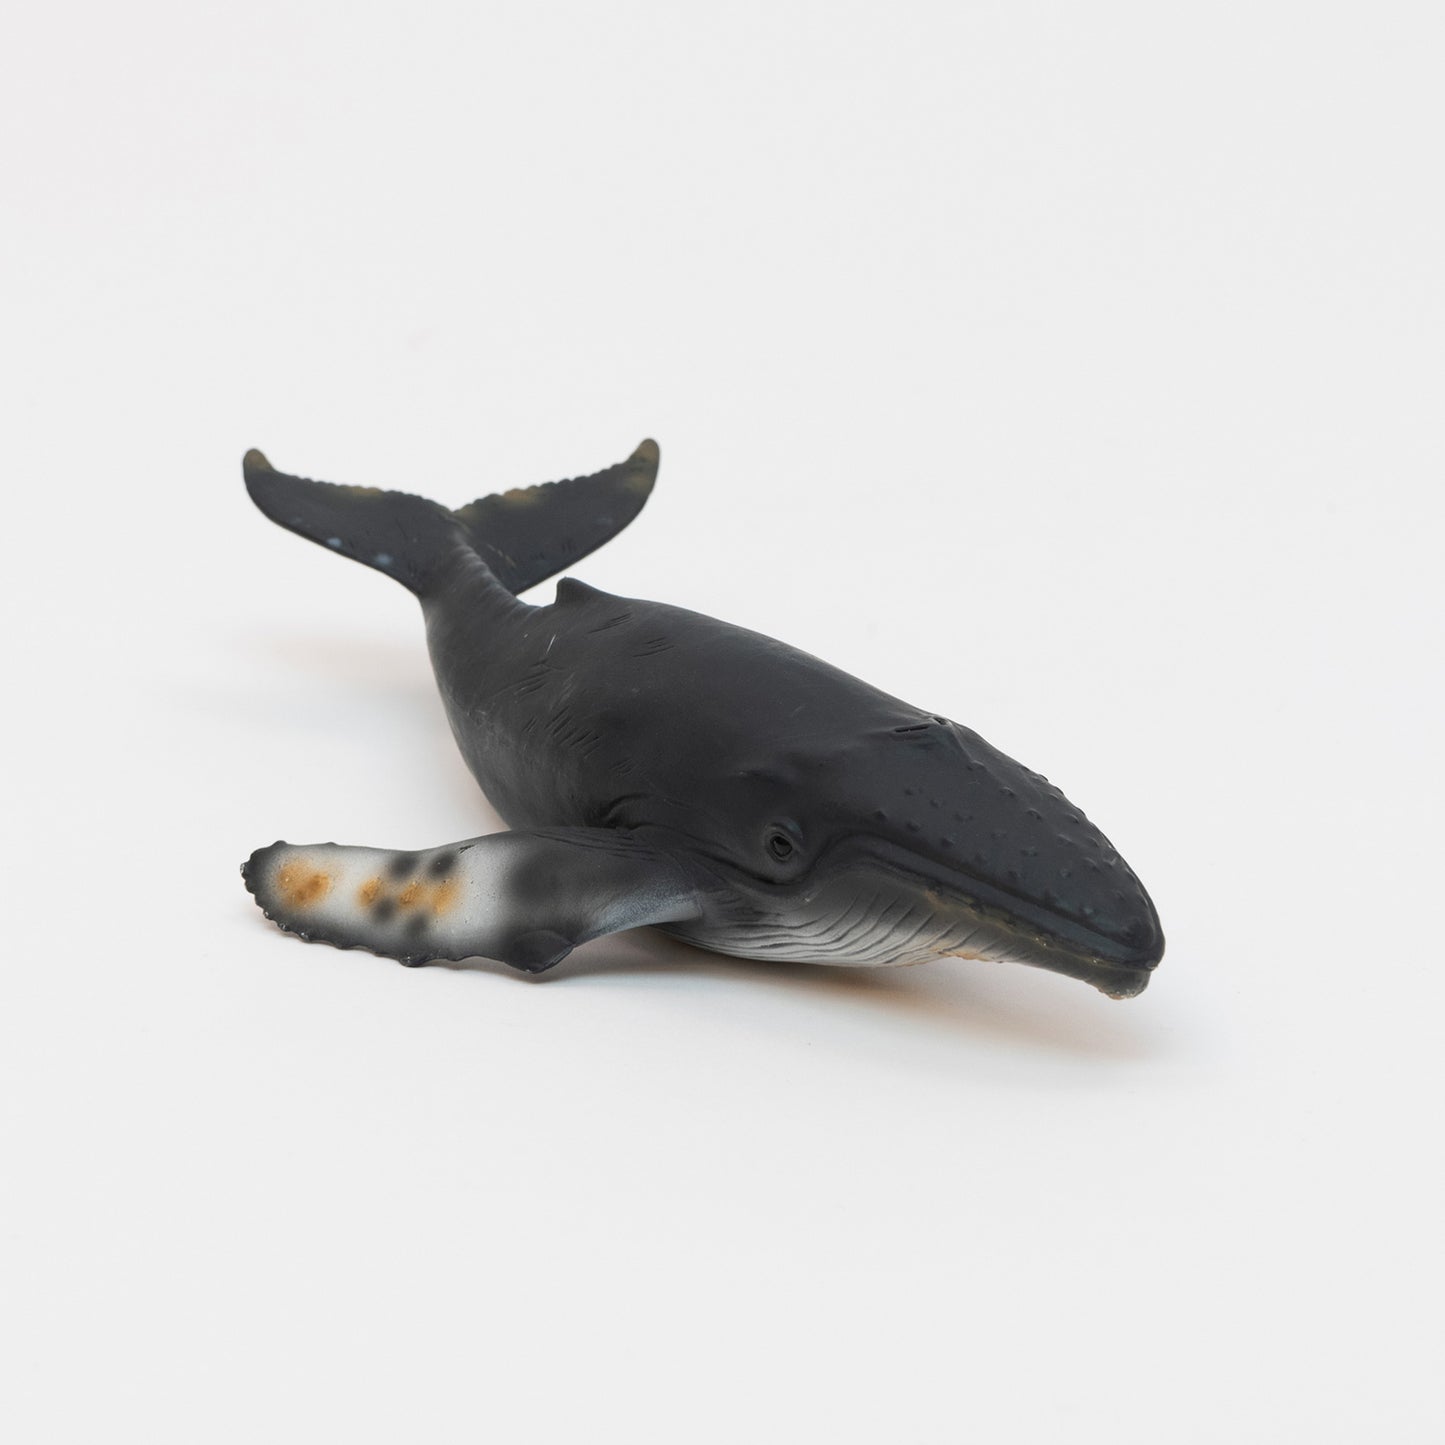 Humpback Whale Toy. Realistic hard plastic humpback whale toy. dark grey with mottled fins and tail.